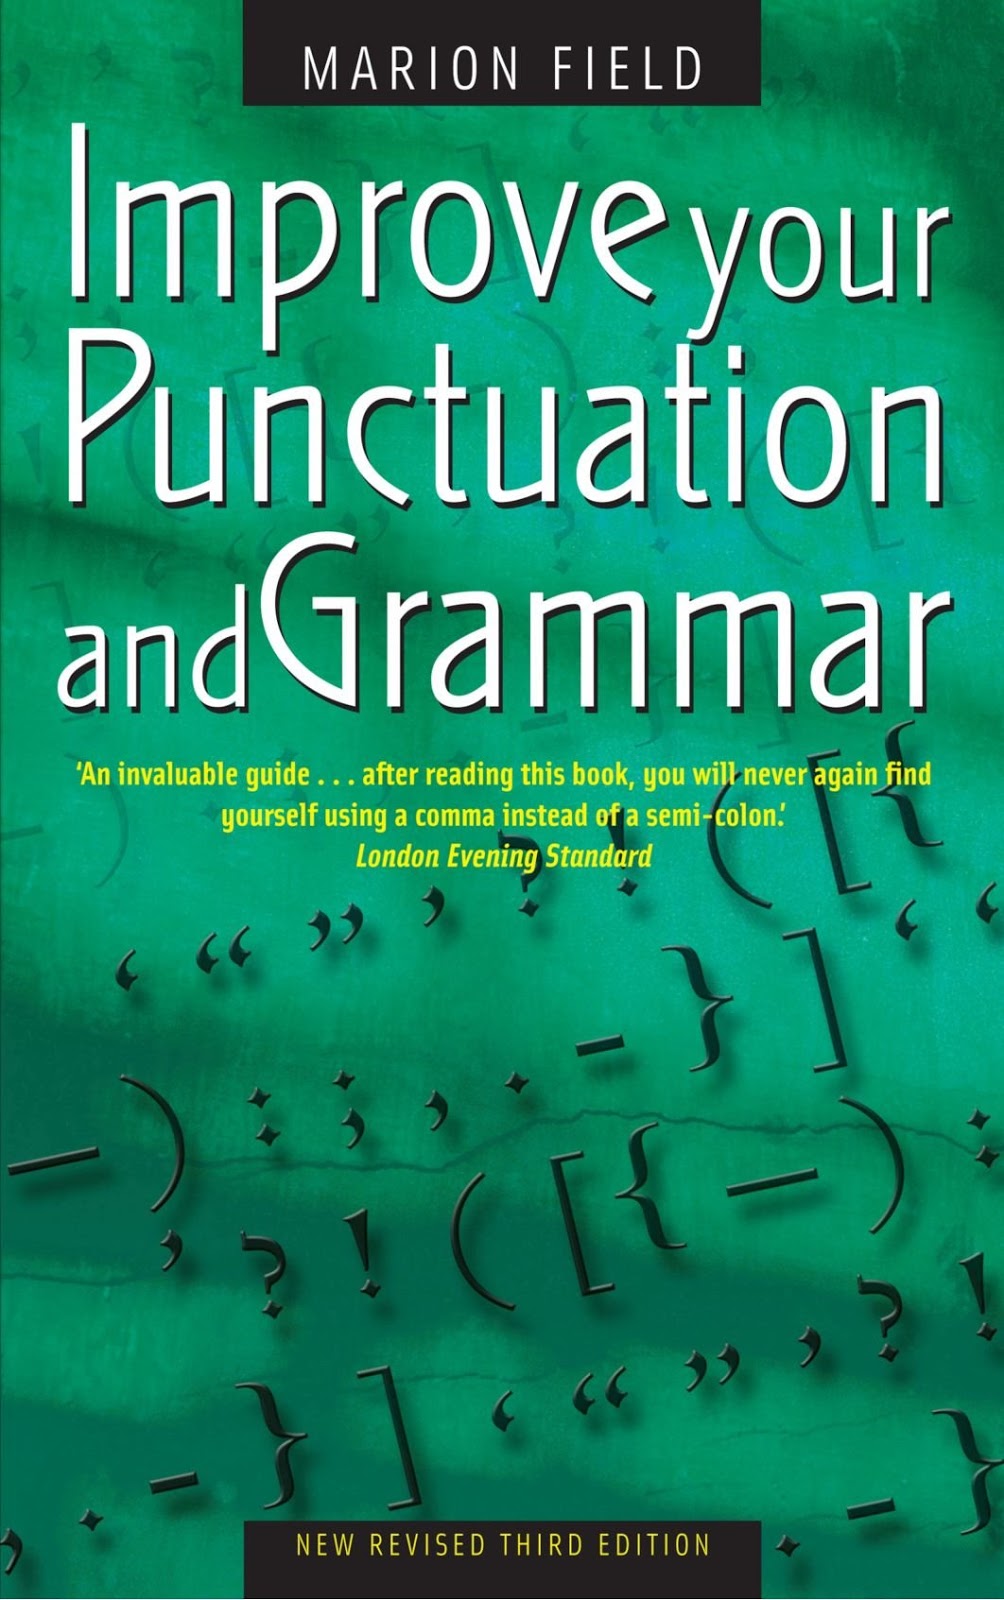 grammar-and-punctuation-book-5-publisher-marketing-associates